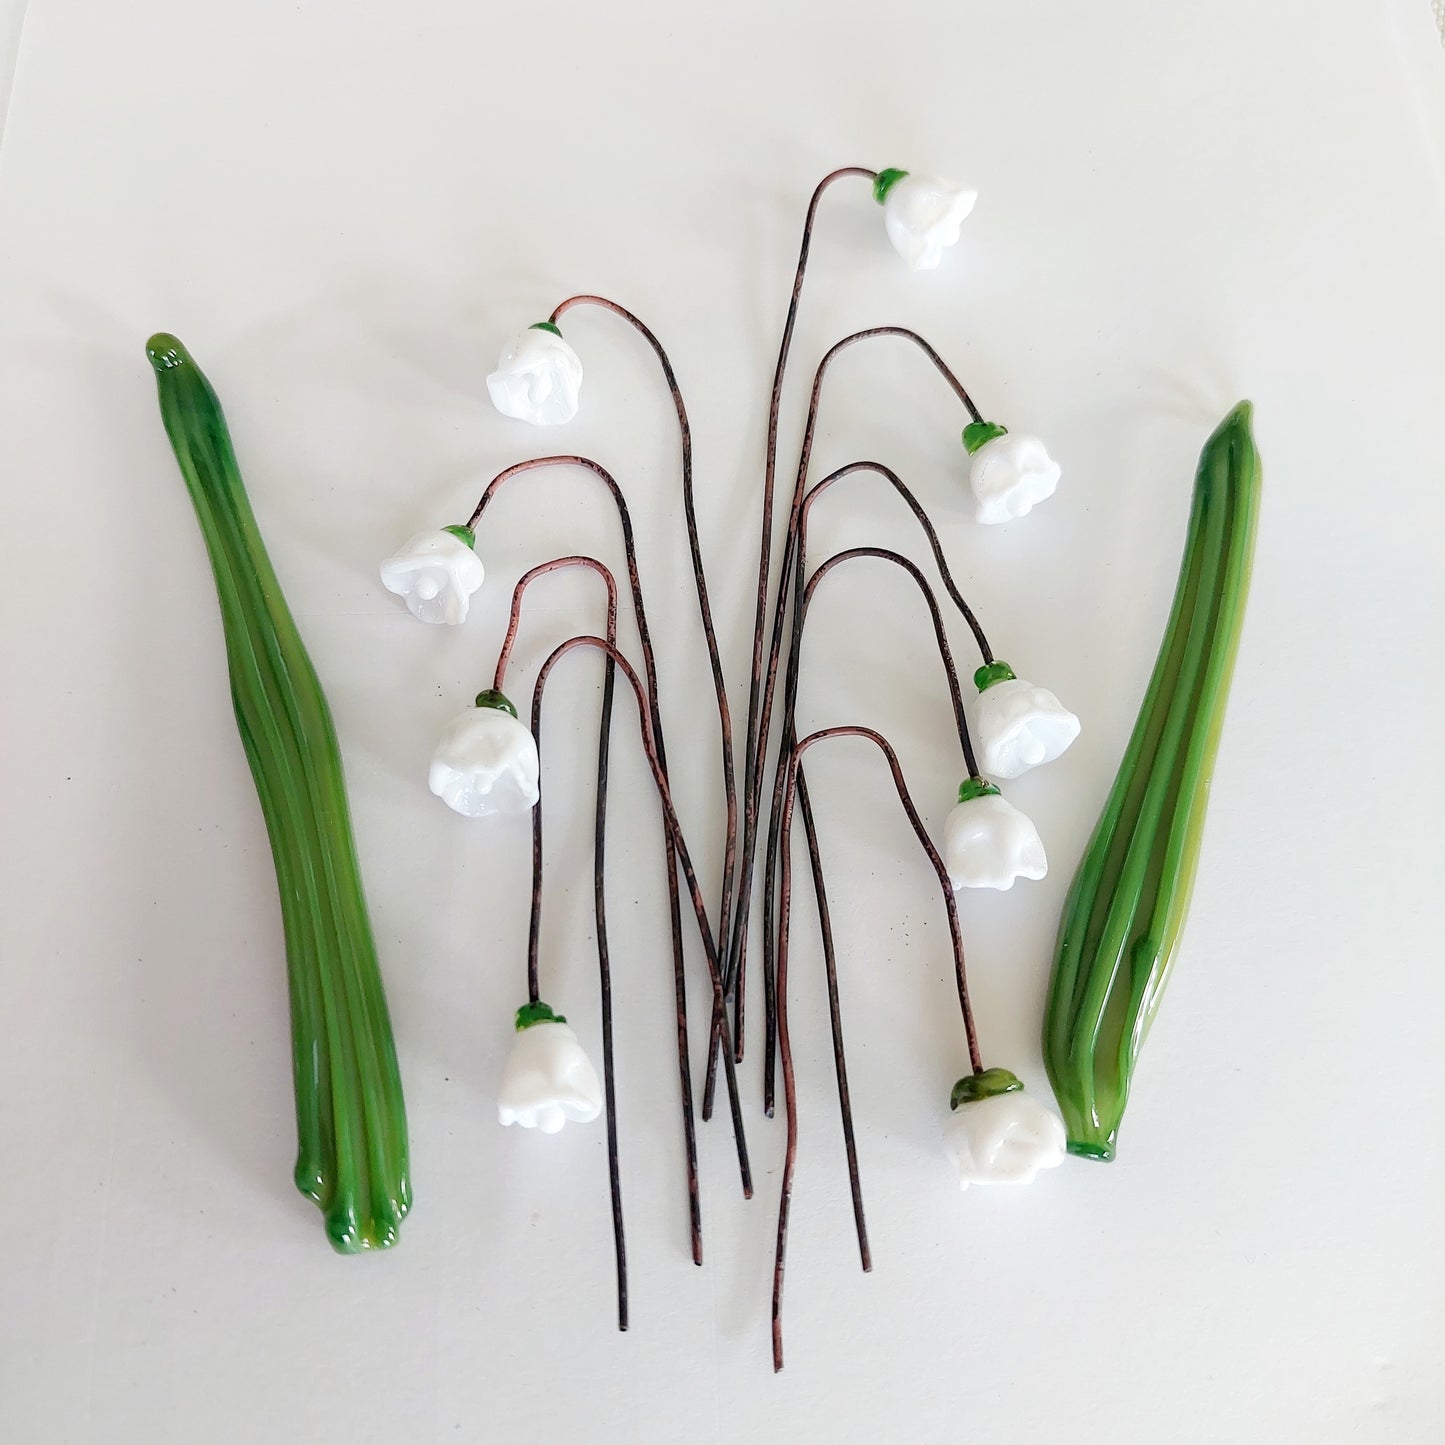 NEW!! Glass Art - Lily of the Valley Bouquet